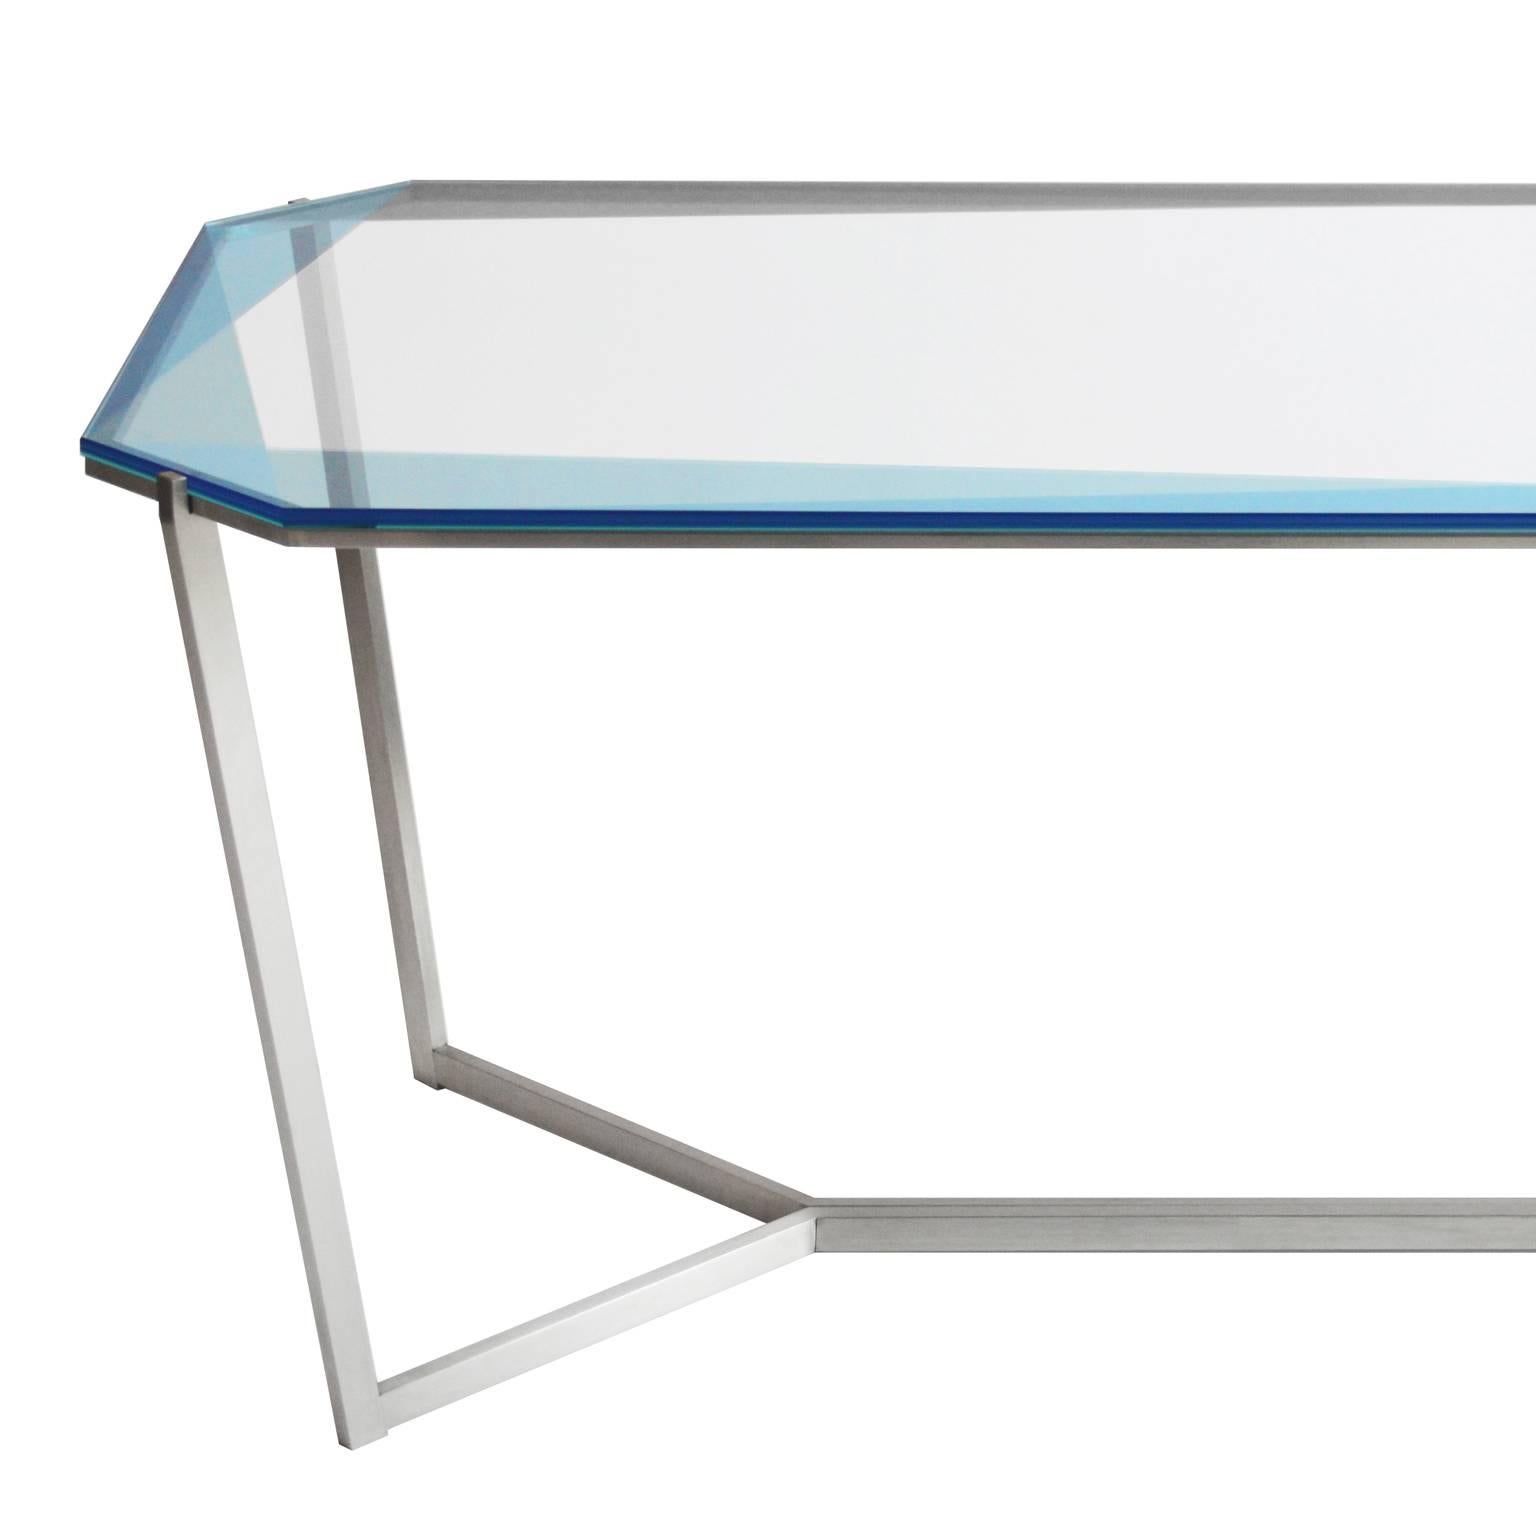 Our gem collection of tables are inspired by the reflections of light and transparencies found in gemstones. These metal and glass tables translate facets through layers of color and varying opacity. Each table base is designed as a setting with